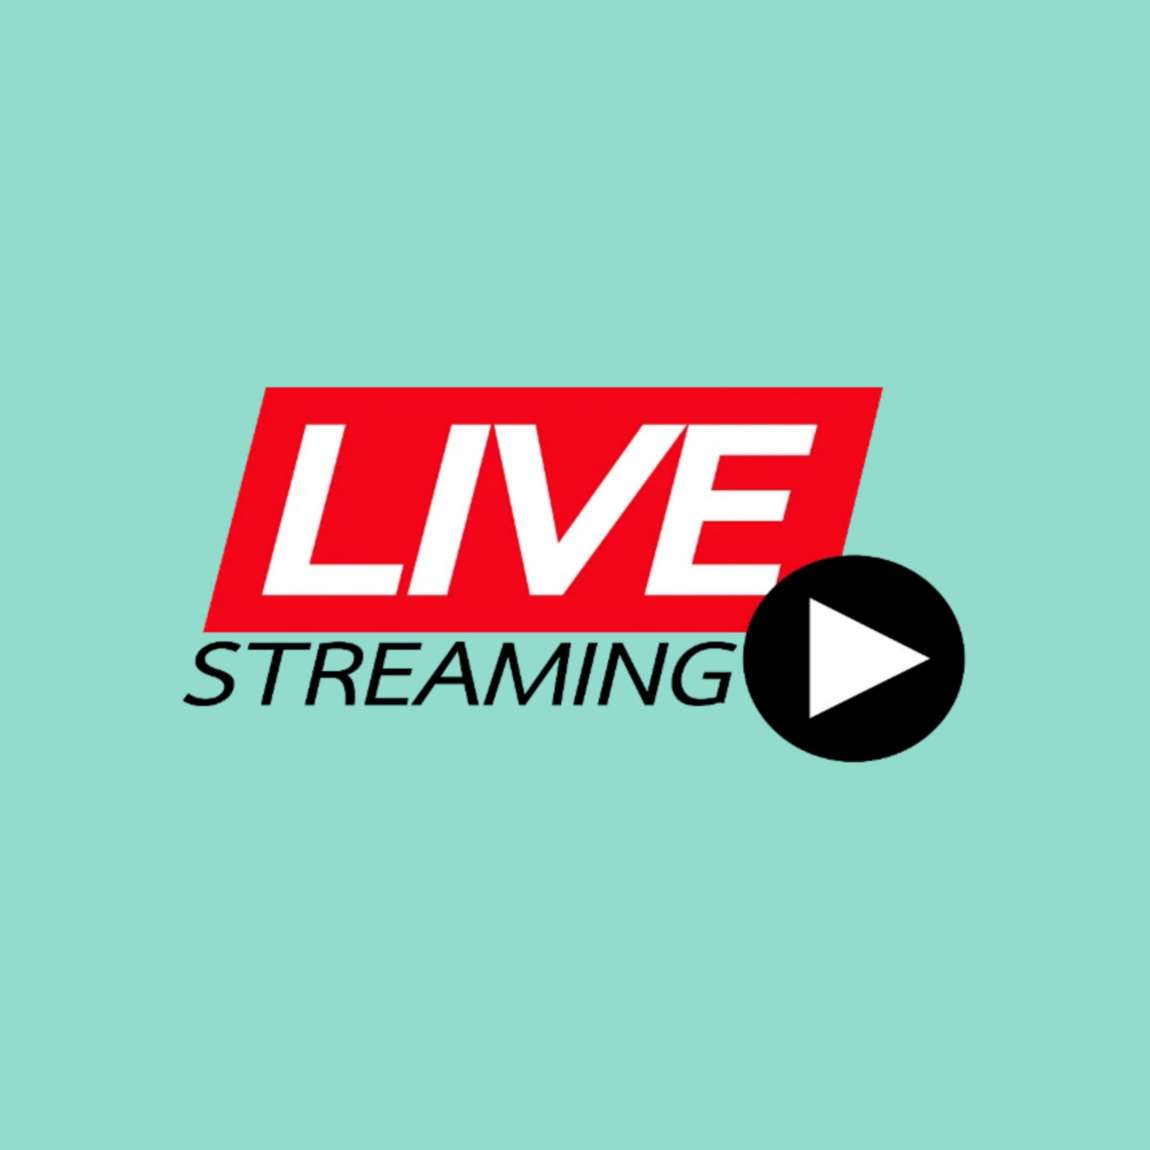 * * * ! ! Arsenal vs Chelsea Live stream Watch TV HD If Streaming Stop 🔔 Watch Live 👉tinyurl.com/d2cw5wwp Leicester City vs Southampton Link Here⏩tinyurl.com/mr2bvtew Follow To Update Stream